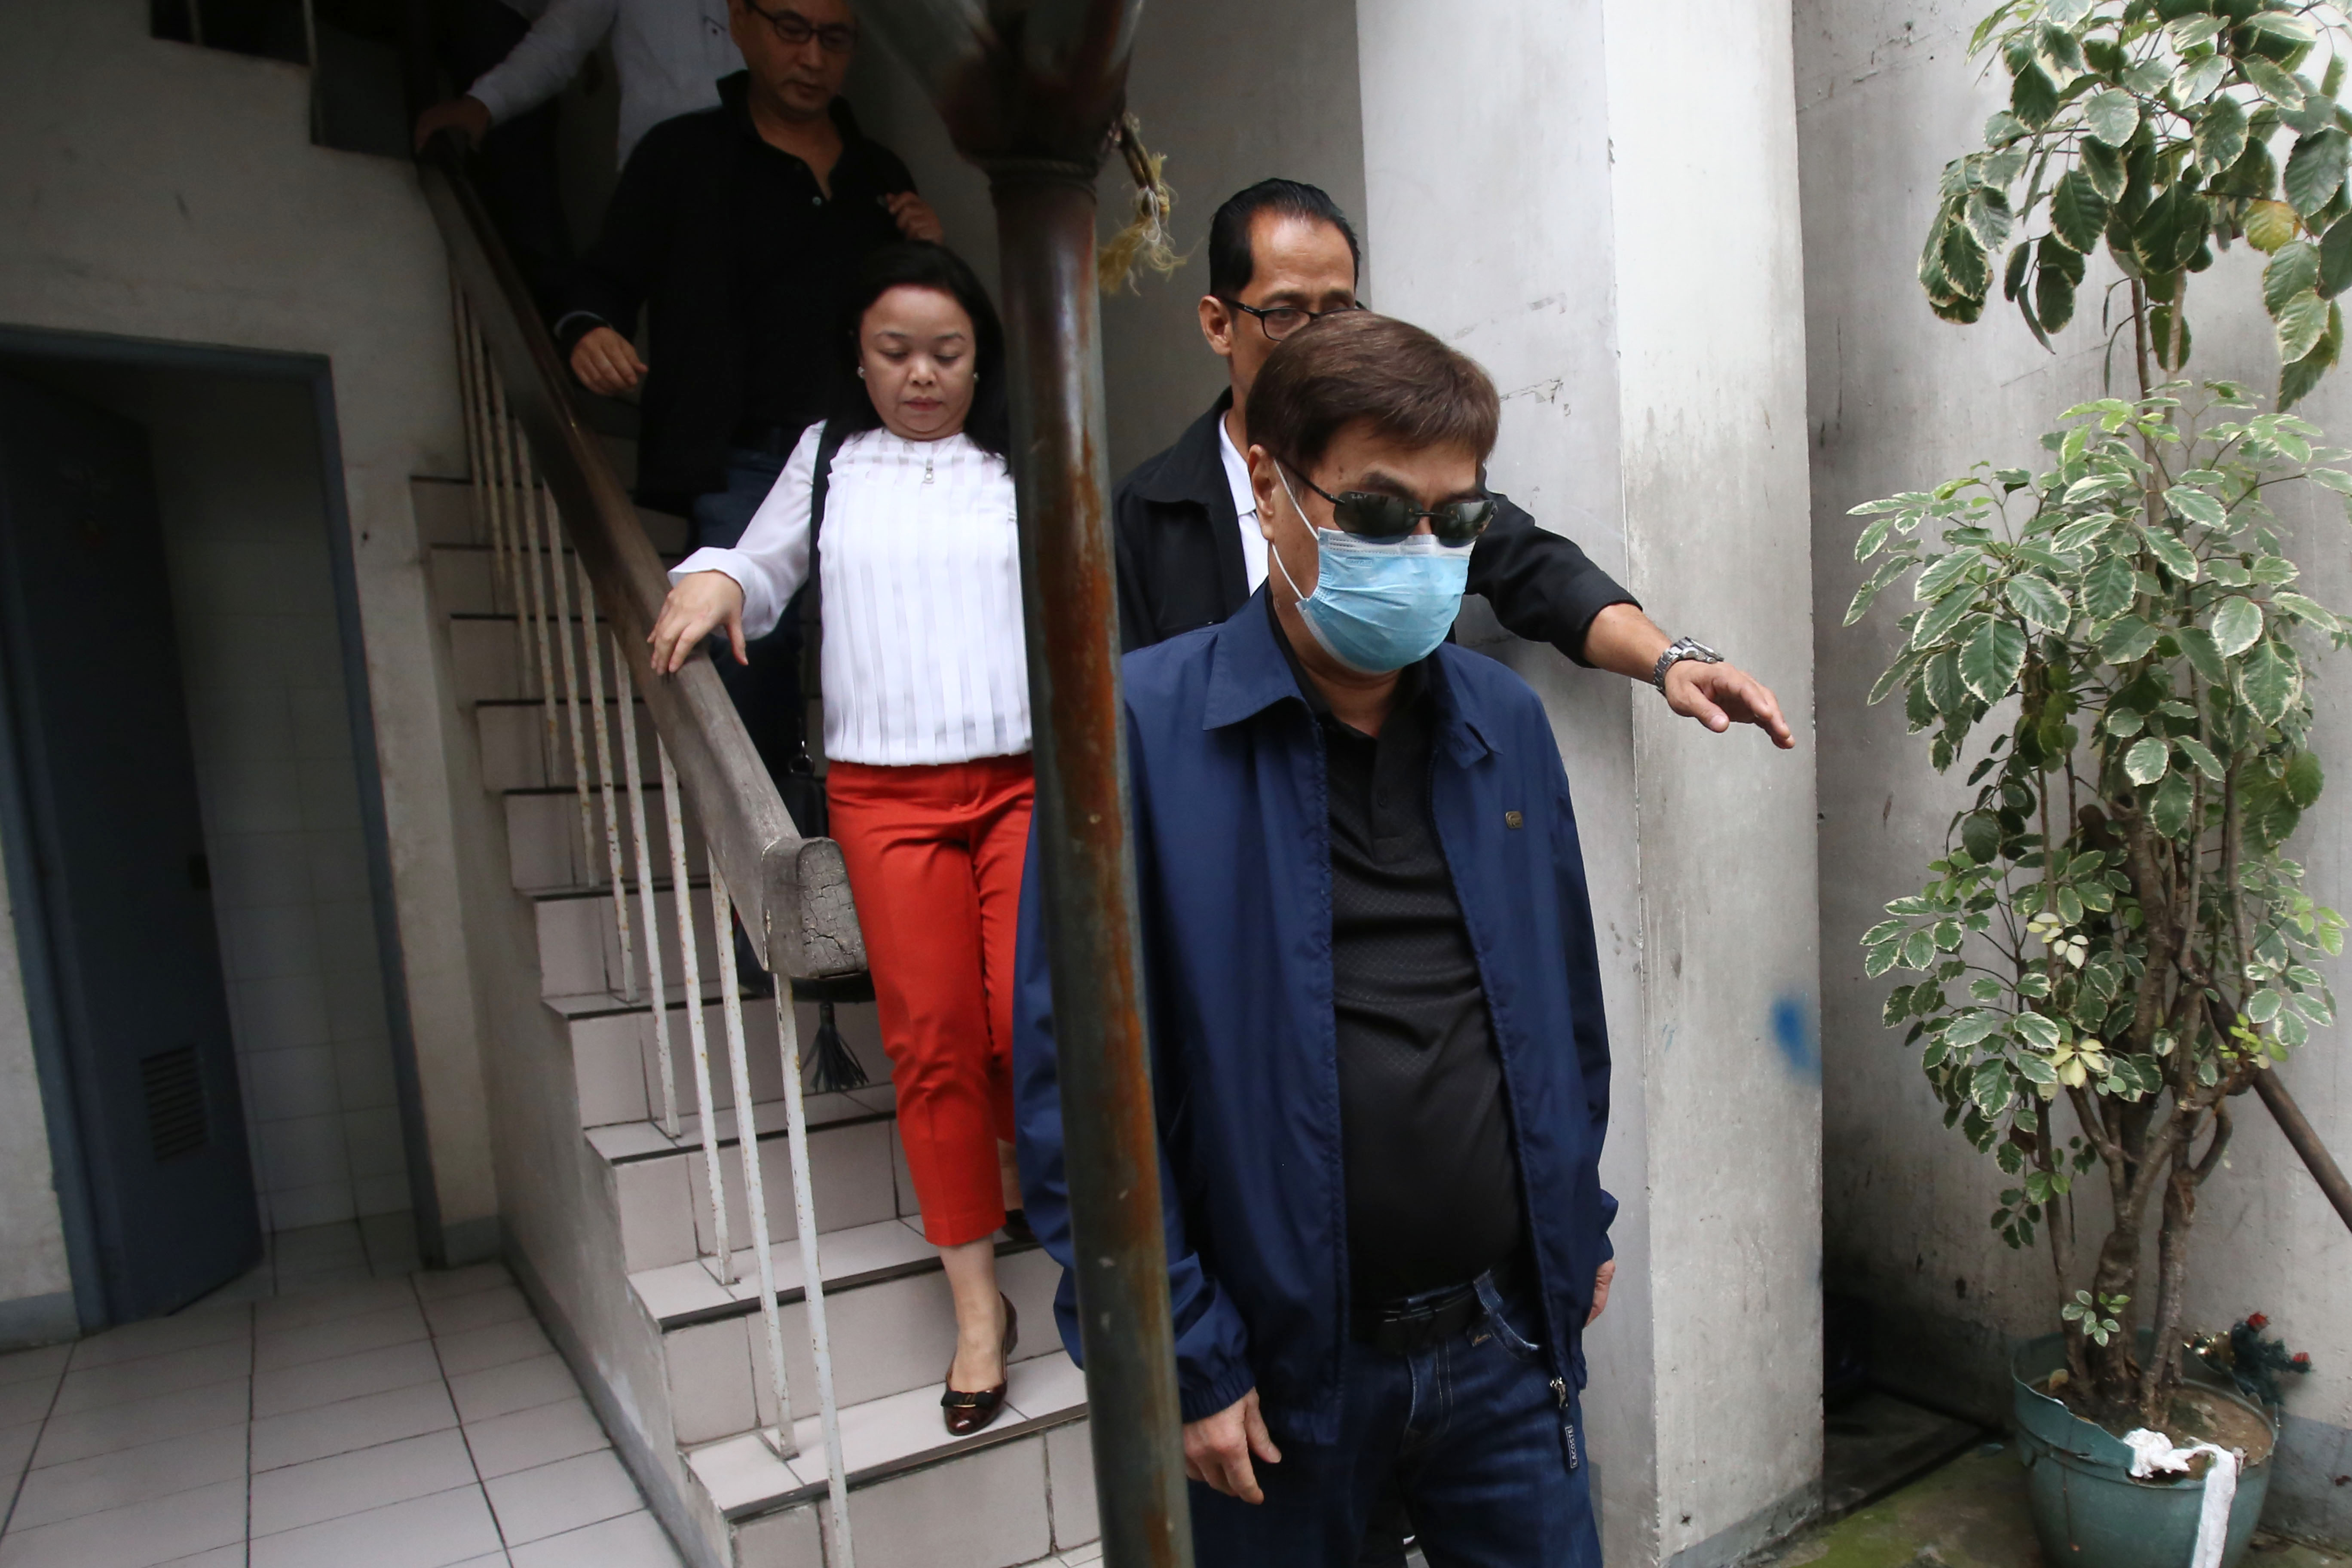 DRUG TRADE. Cebu-based businessman Peter Lim is summoned to the DOJ headquarters in Manila on August 24, 2017, as prosecutors conduct a preliminary investigation into drug trade and conspiracy allegations against him. Photo by Ben Nabong/Rappler